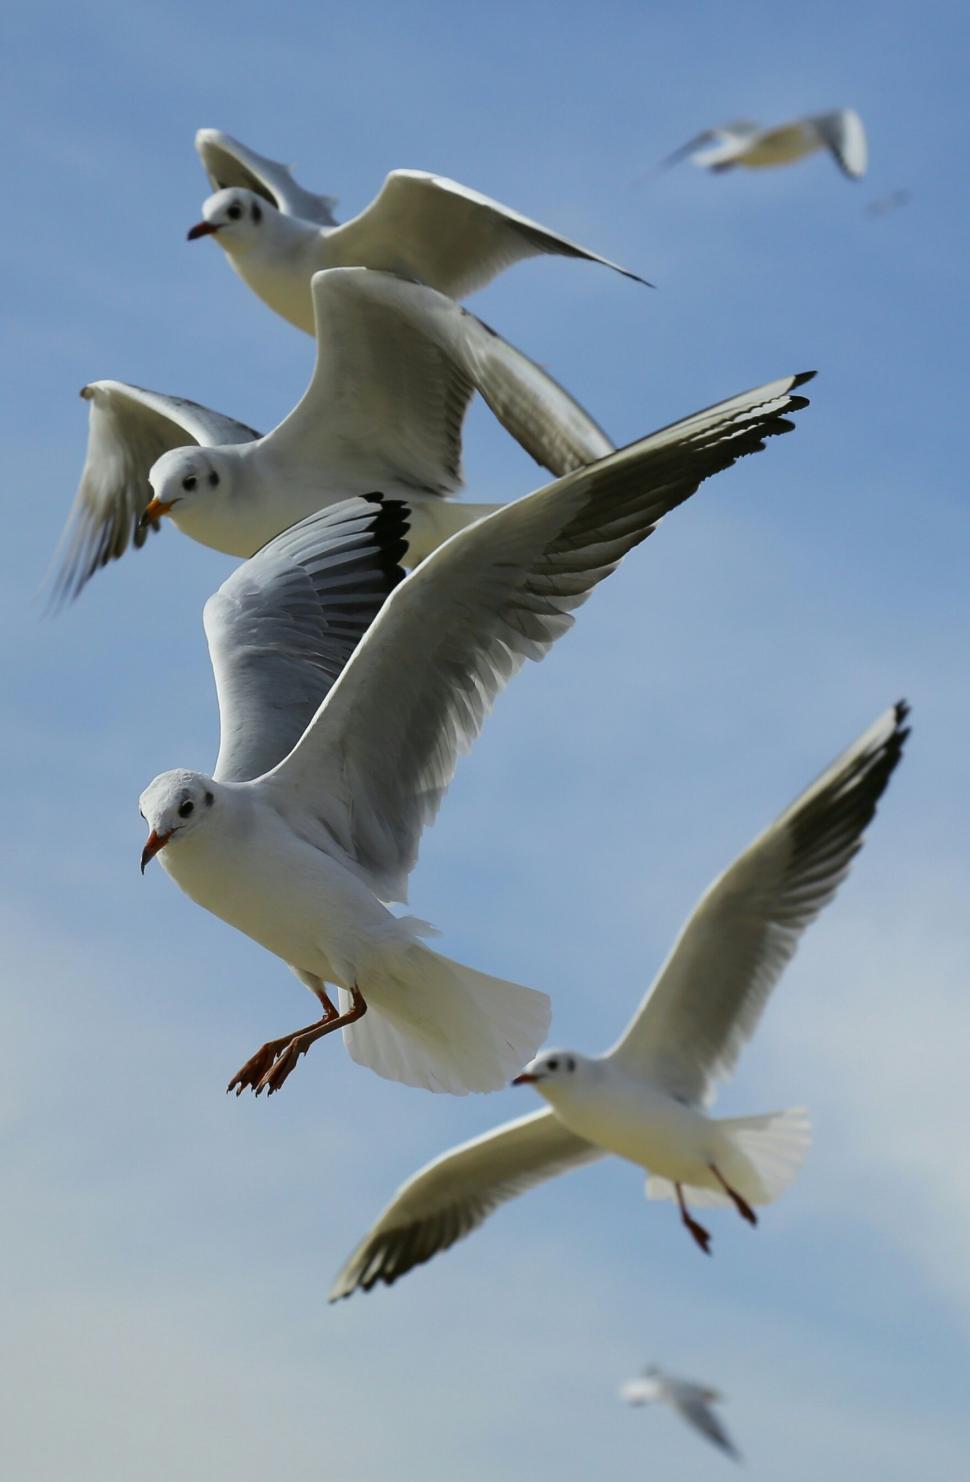 Free Image of Seagulls Flying in the Air  